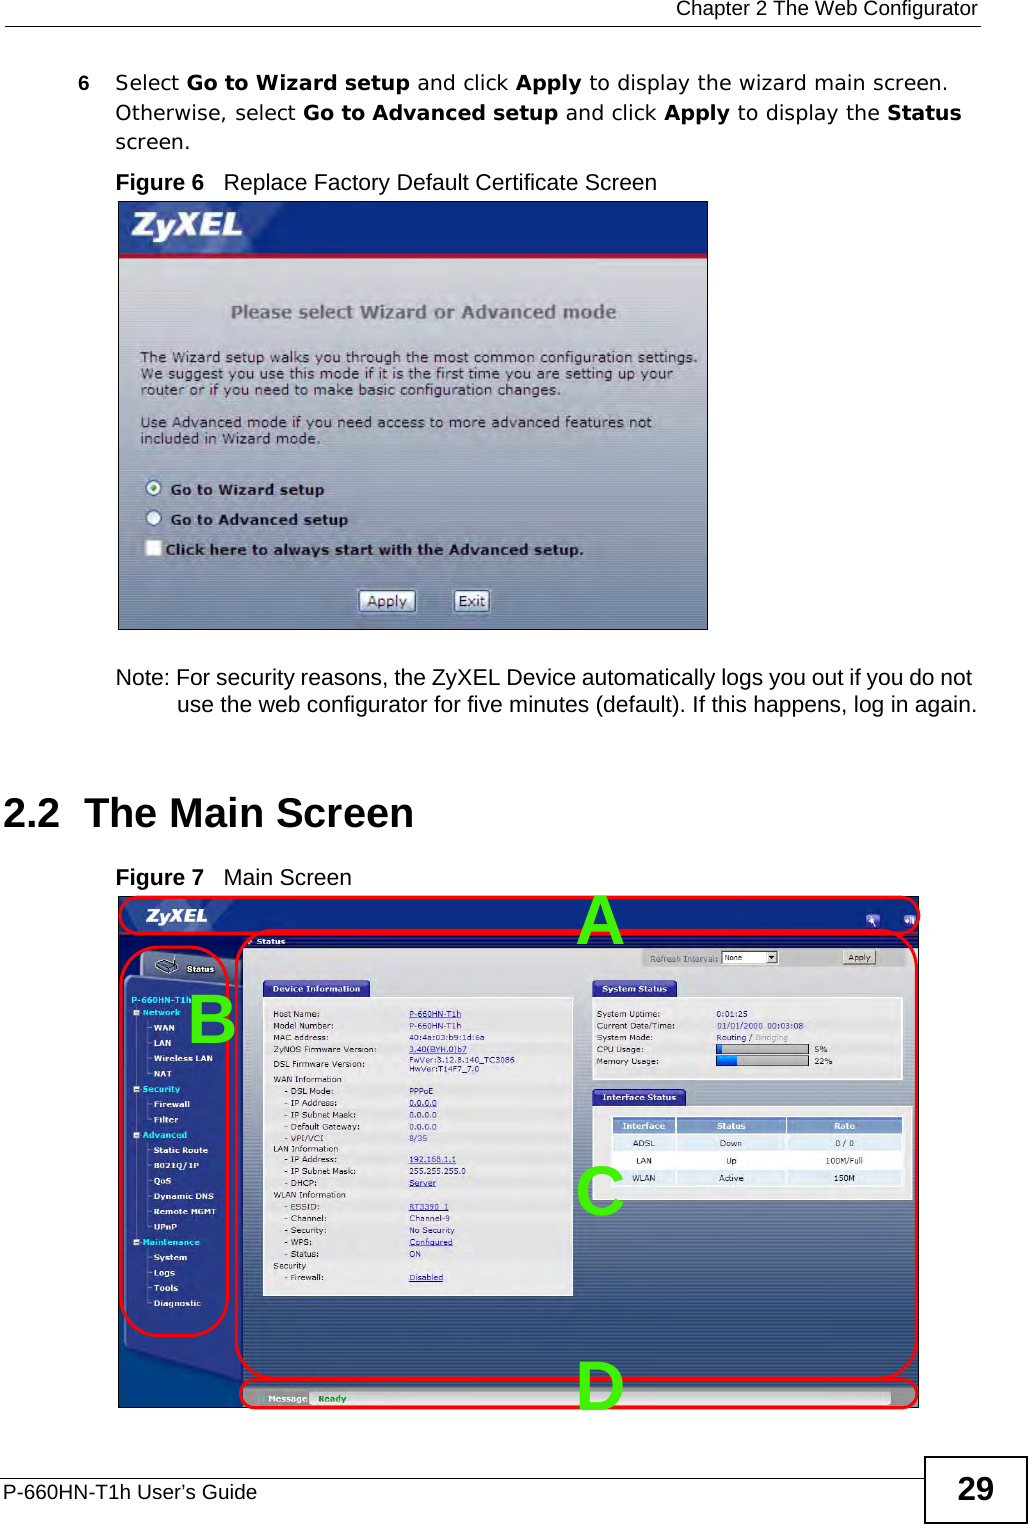  Chapter 2 The Web ConfiguratorP-660HN-T1h User’s Guide 296Select Go to Wizard setup and click Apply to display the wizard main screen. Otherwise, select Go to Advanced setup and click Apply to display the Status screen.Figure 6   Replace Factory Default Certificate Screen Note: For security reasons, the ZyXEL Device automatically logs you out if you do not use the web configurator for five minutes (default). If this happens, log in again.2.2  The Main ScreenFigure 7   Main ScreenBCDA